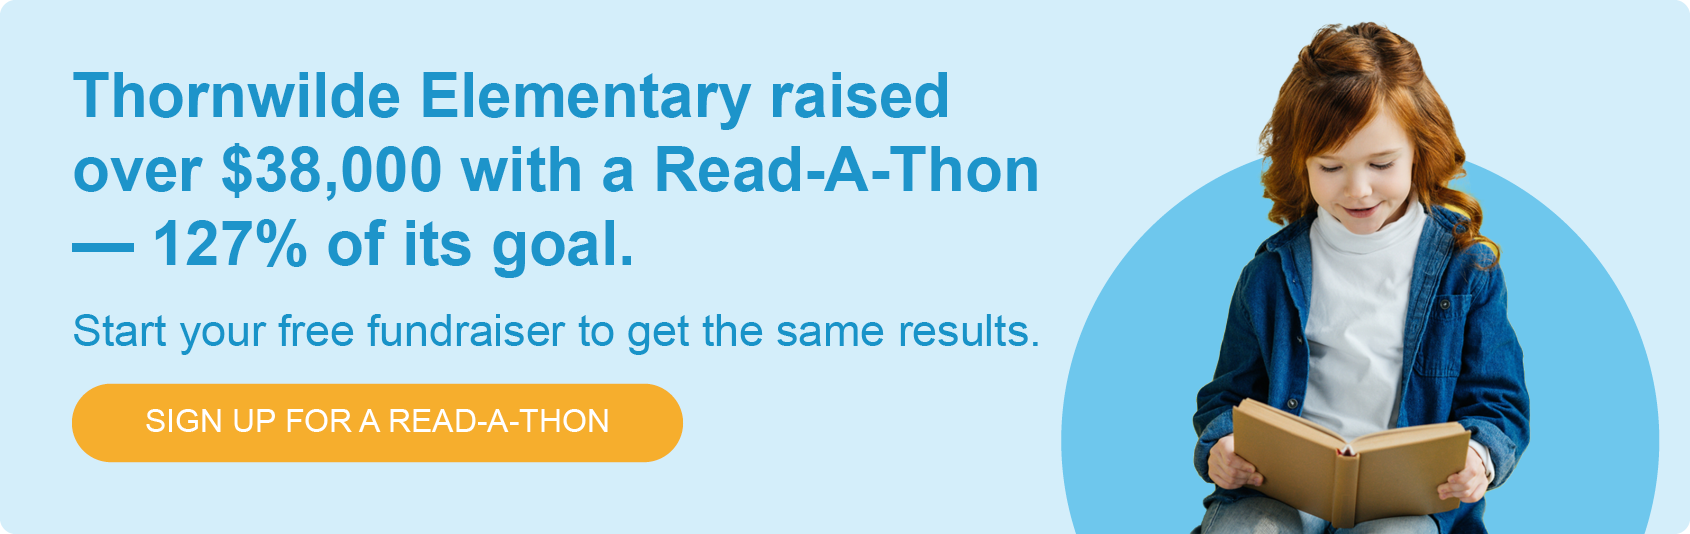 Thornwilde Elementary raised over $38,000 with a Read-A-Thon. Start raising for your school and inspiring students with school fundraising prizes.